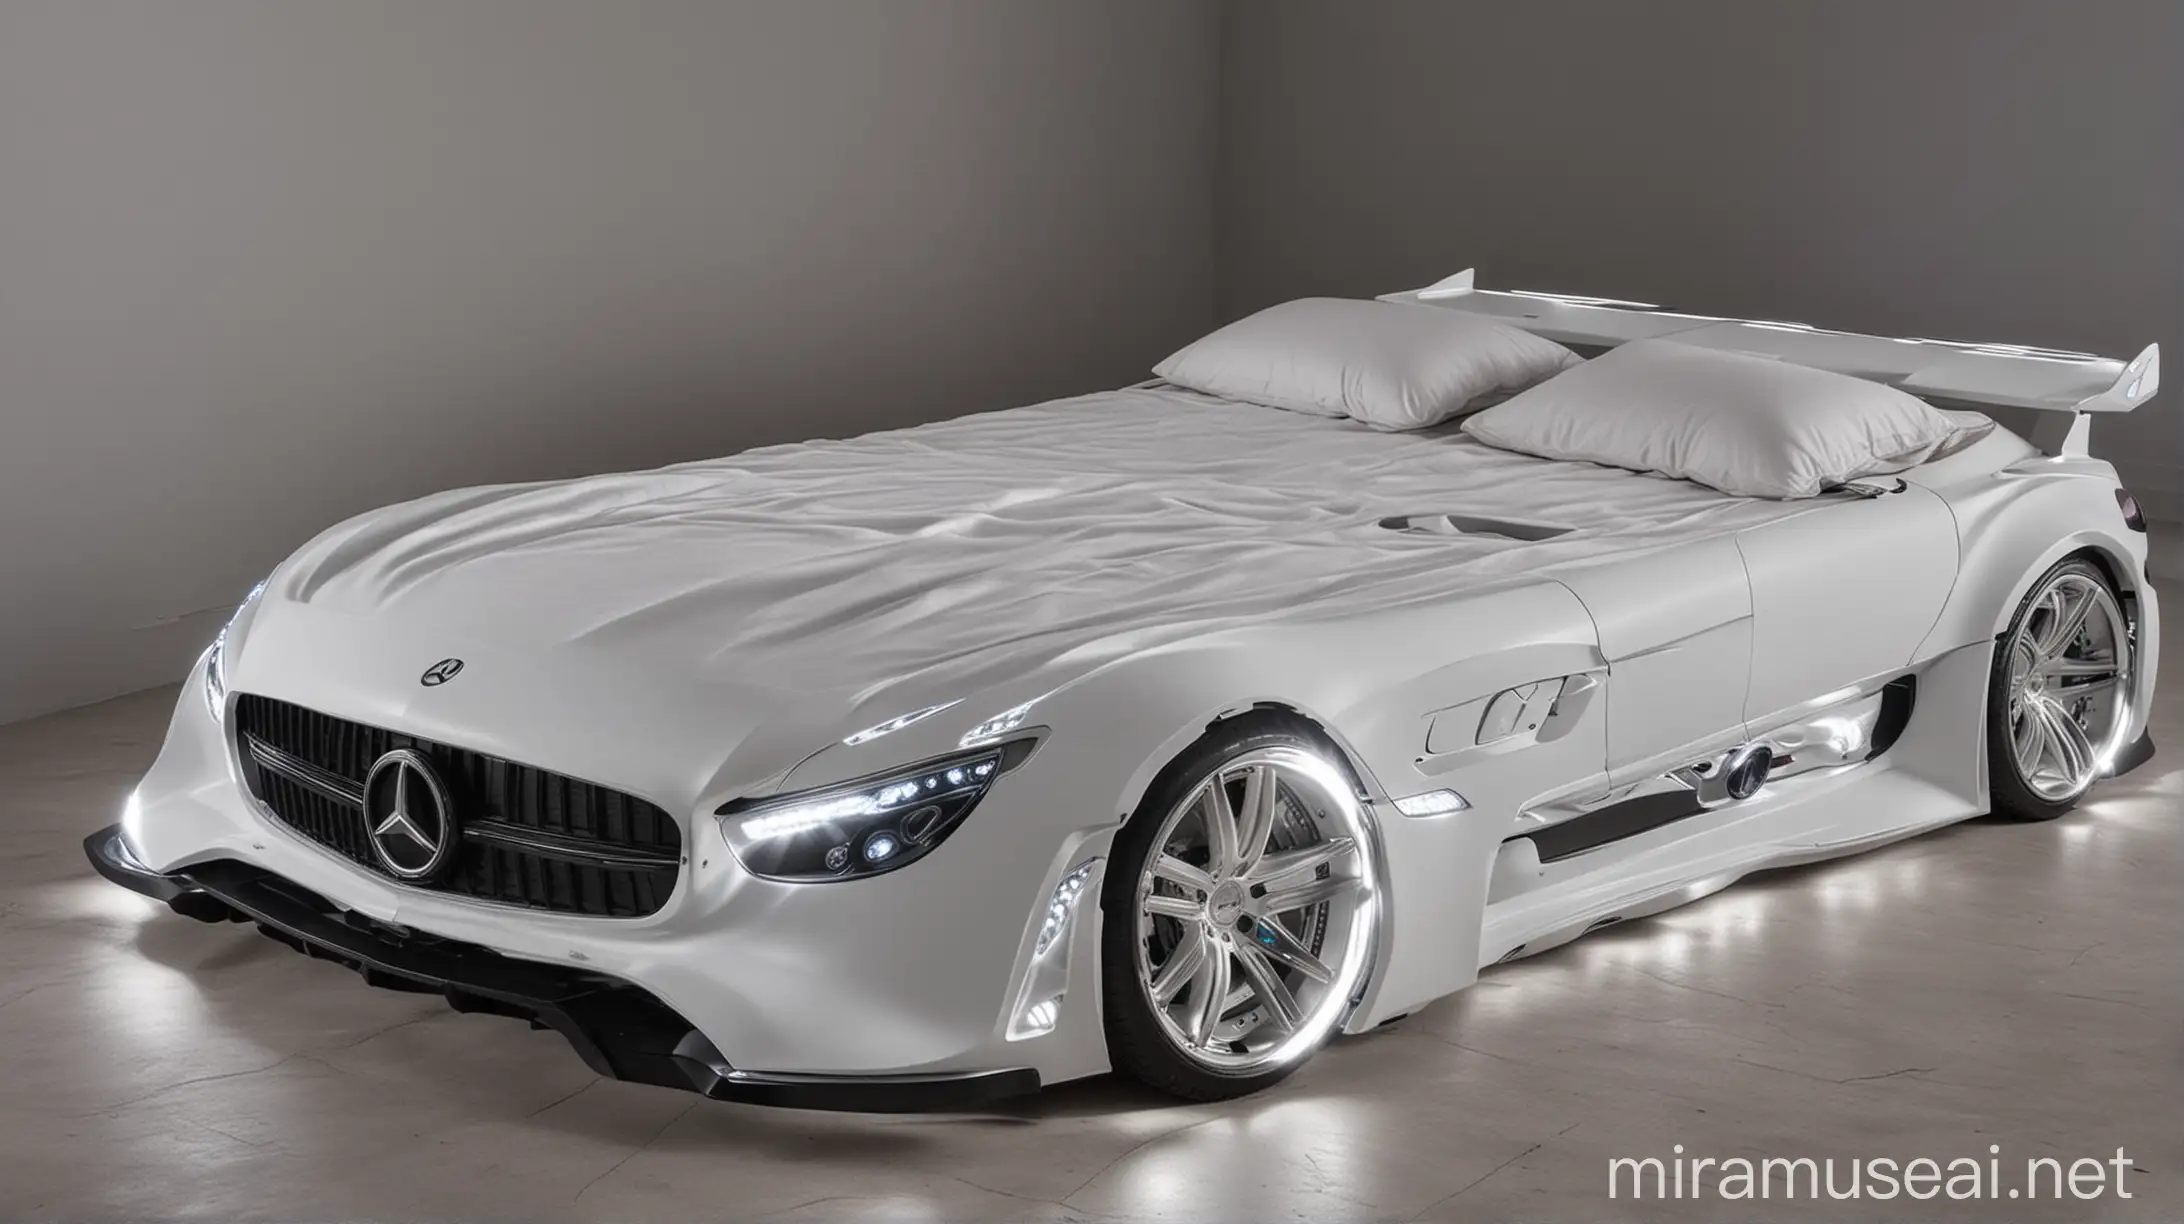 Double bed in the shape of a Mercedes amg car with headlights on